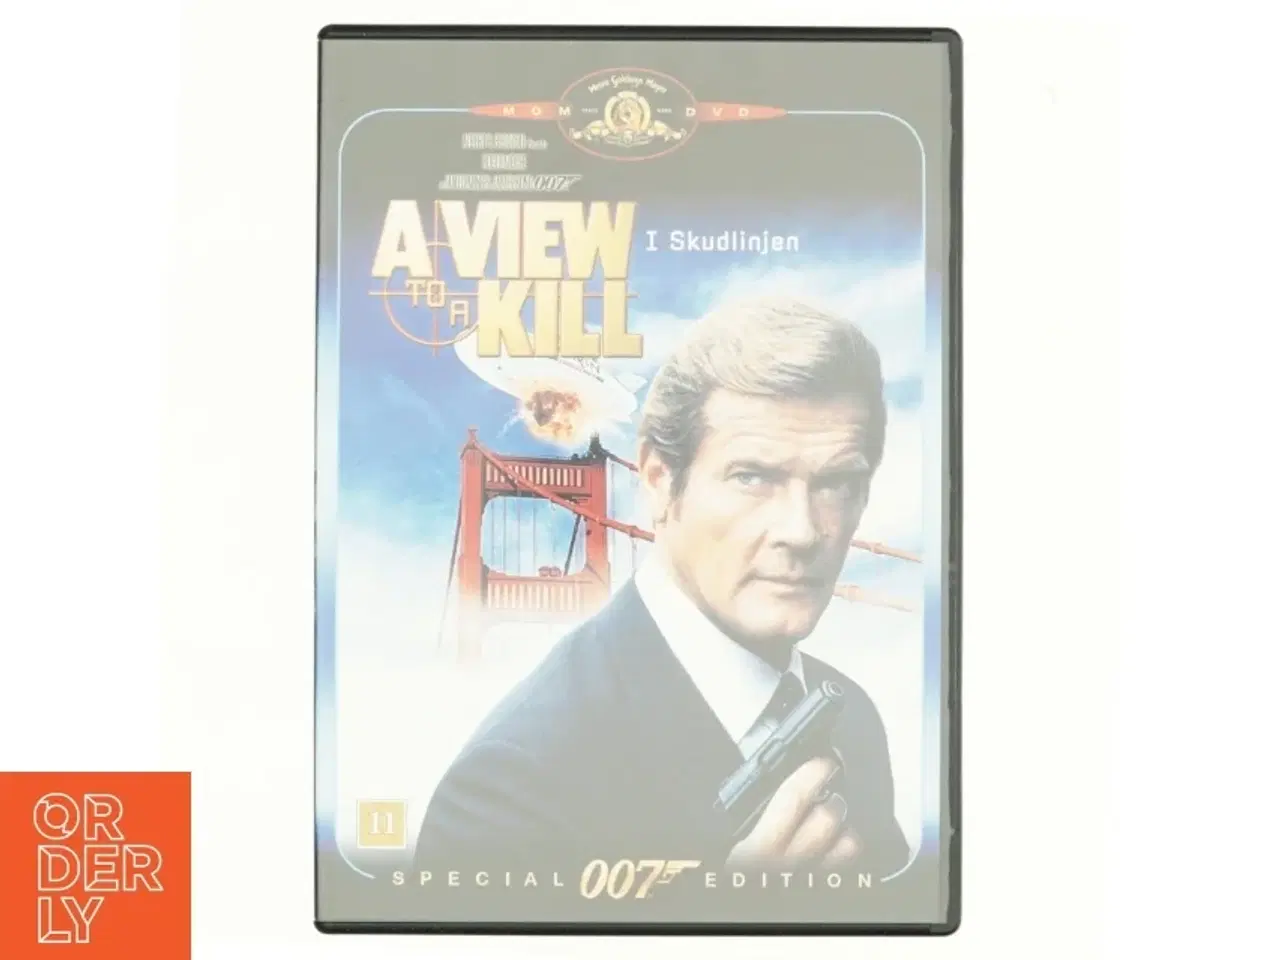 Billede 1 - Agent 007 - a View to a Kill